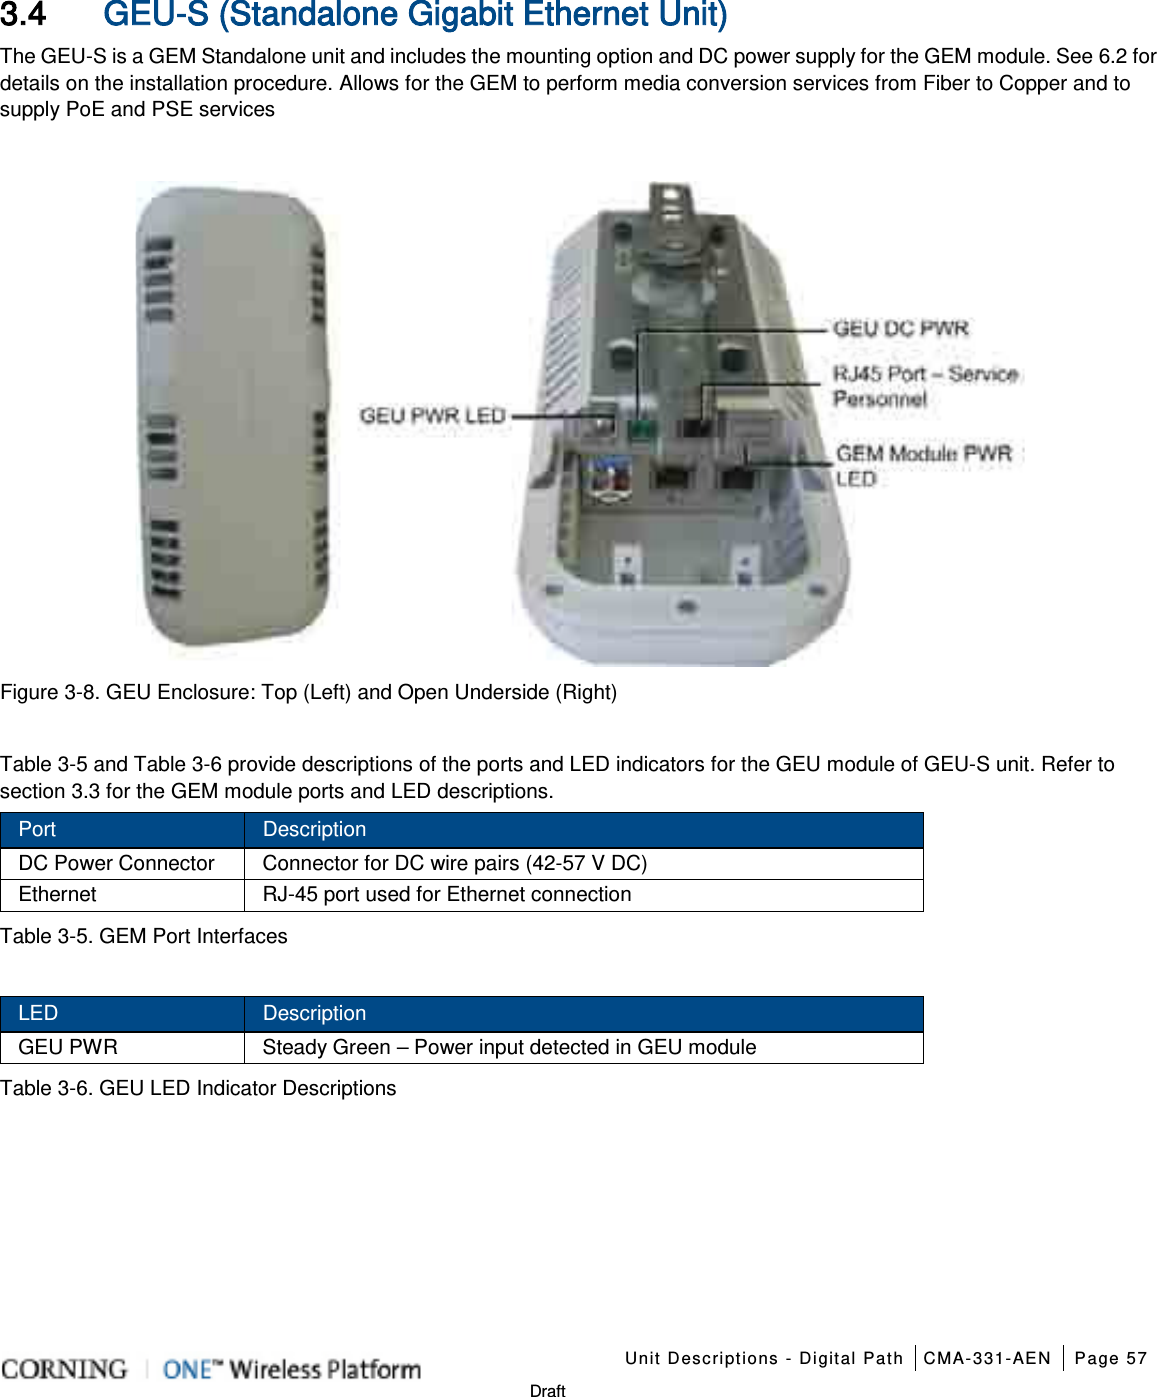    Unit Descriptions - Digital Path CMA-331-AEN Page 57   Draft 3.4 GEU-S (Standalone Gigabit Ethernet Unit) The GEU-S is a GEM Standalone unit and includes the mounting option and DC power supply for the GEM module. See  6.2 for details on the installation procedure. Allows for the GEM to perform media conversion services from Fiber to Copper and to supply PoE and PSE services   Figure  3-8. GEU Enclosure: Top (Left) and Open Underside (Right)  Table  3-5 and Table  3-6 provide descriptions of the ports and LED indicators for the GEU module of GEU-S unit. Refer to section  3.3 for the GEM module ports and LED descriptions. Port Description DC Power Connector Connector for DC wire pairs (42-57 V DC) Ethernet RJ-45 port used for Ethernet connection   Table  3-5. GEM Port Interfaces  LED Description GEU PWR Steady Green – Power input detected in GEU module Table  3-6. GEU LED Indicator Descriptions   